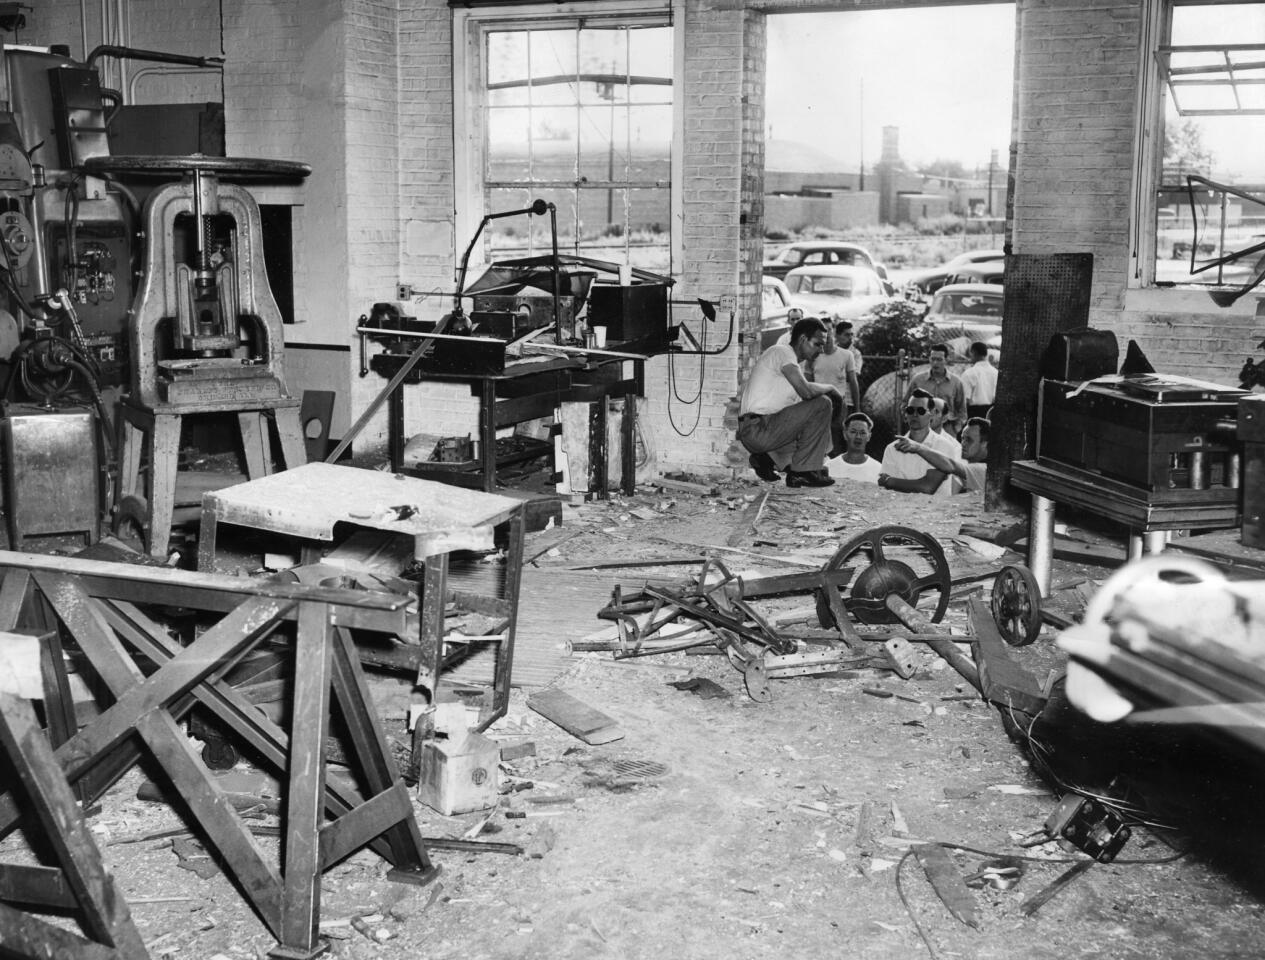 Aug. 24, 1955: A second bombing occurred at the Richard O. Schulz Co. factory in Elmwood Park. Five men in the tool and die plant were injured. The blast was the 25th bombing in Cook County in 15 months. During the same timespan, seven bombings occurred in Kane and Lake counties.